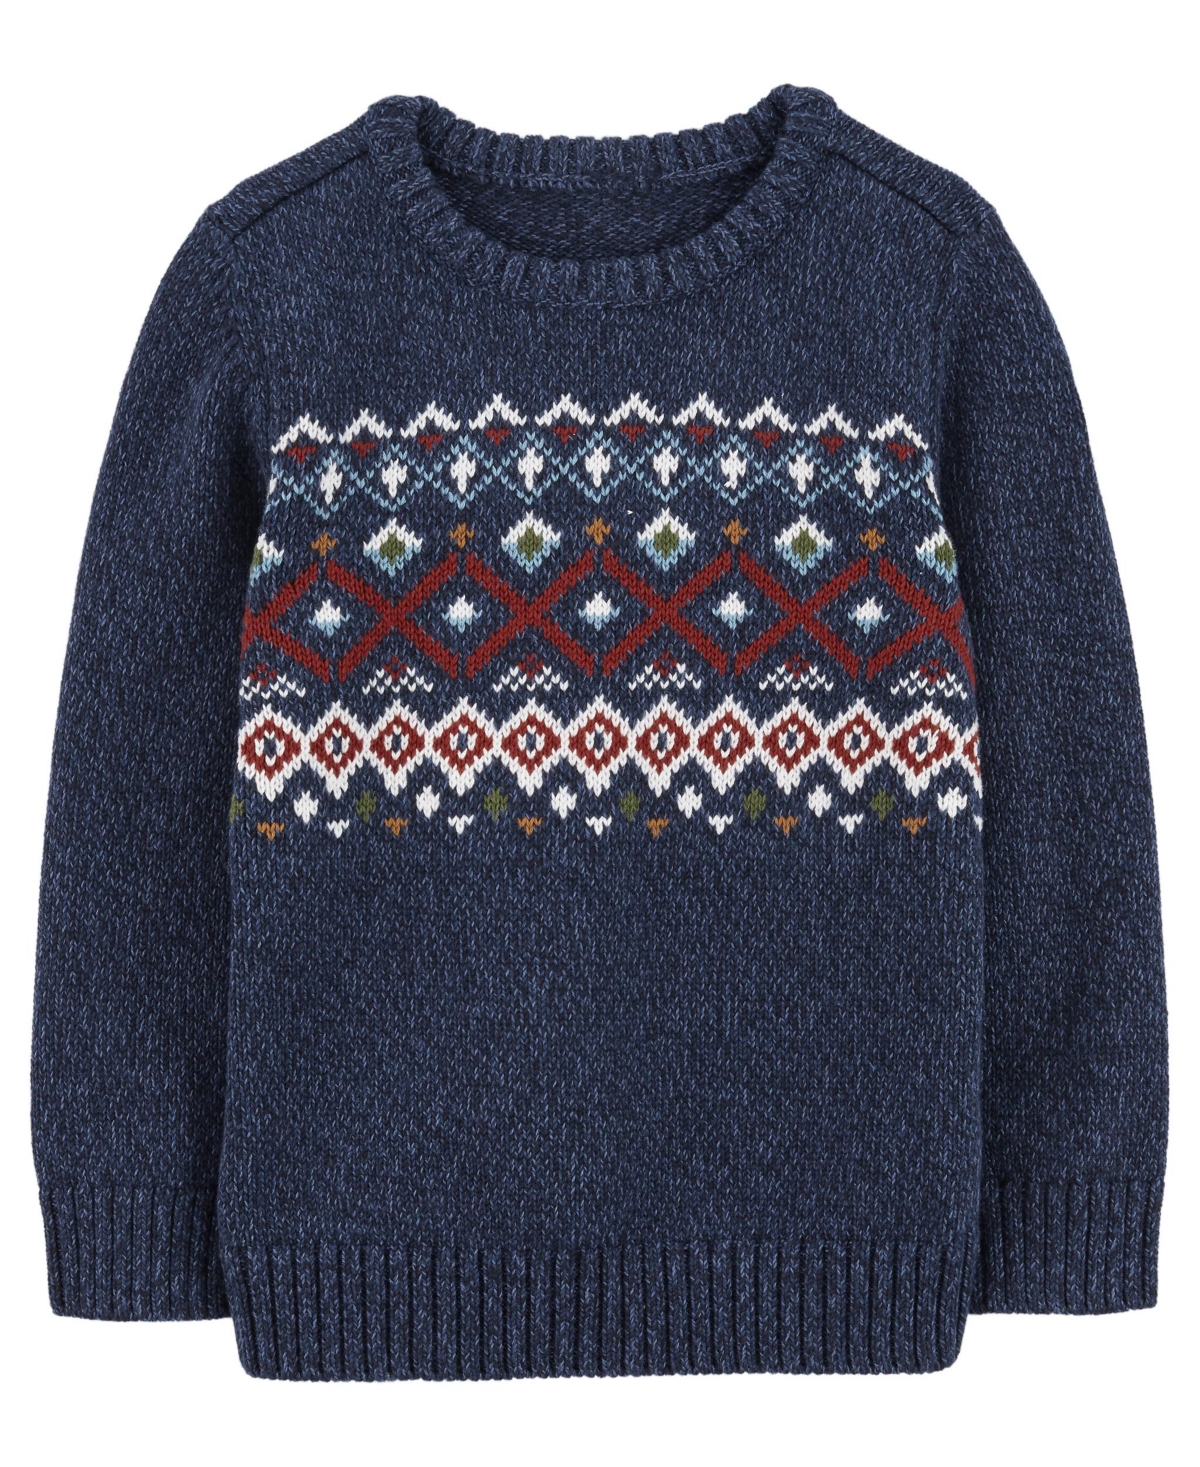 Carter's Babies' Toddler Boys Fair Isle Cotton Sweater In Blue